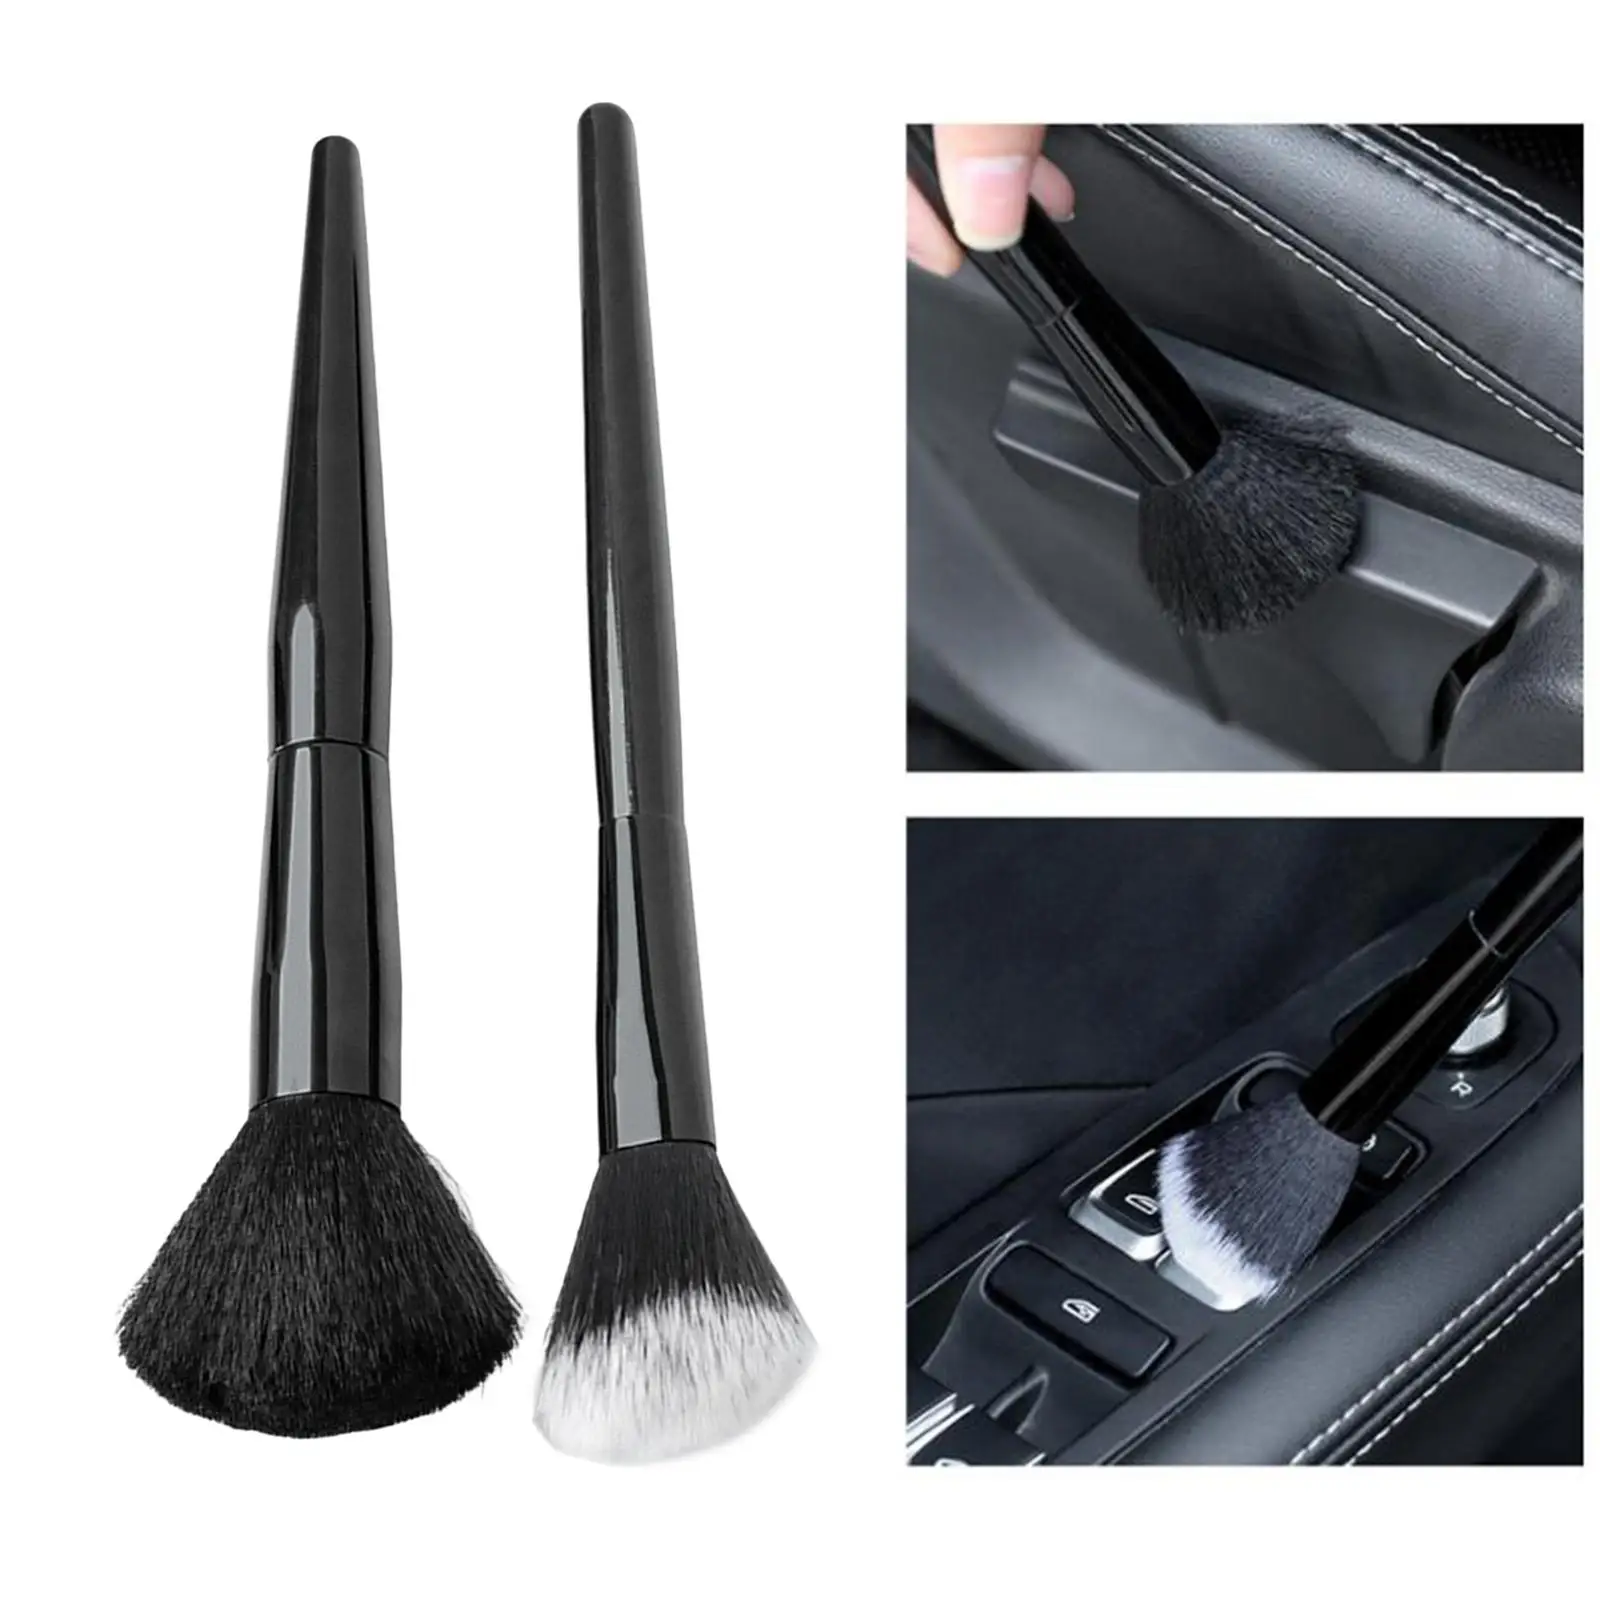 2x Car Detailing Brush Detail Cleaning Brushes for Computer Keyboard